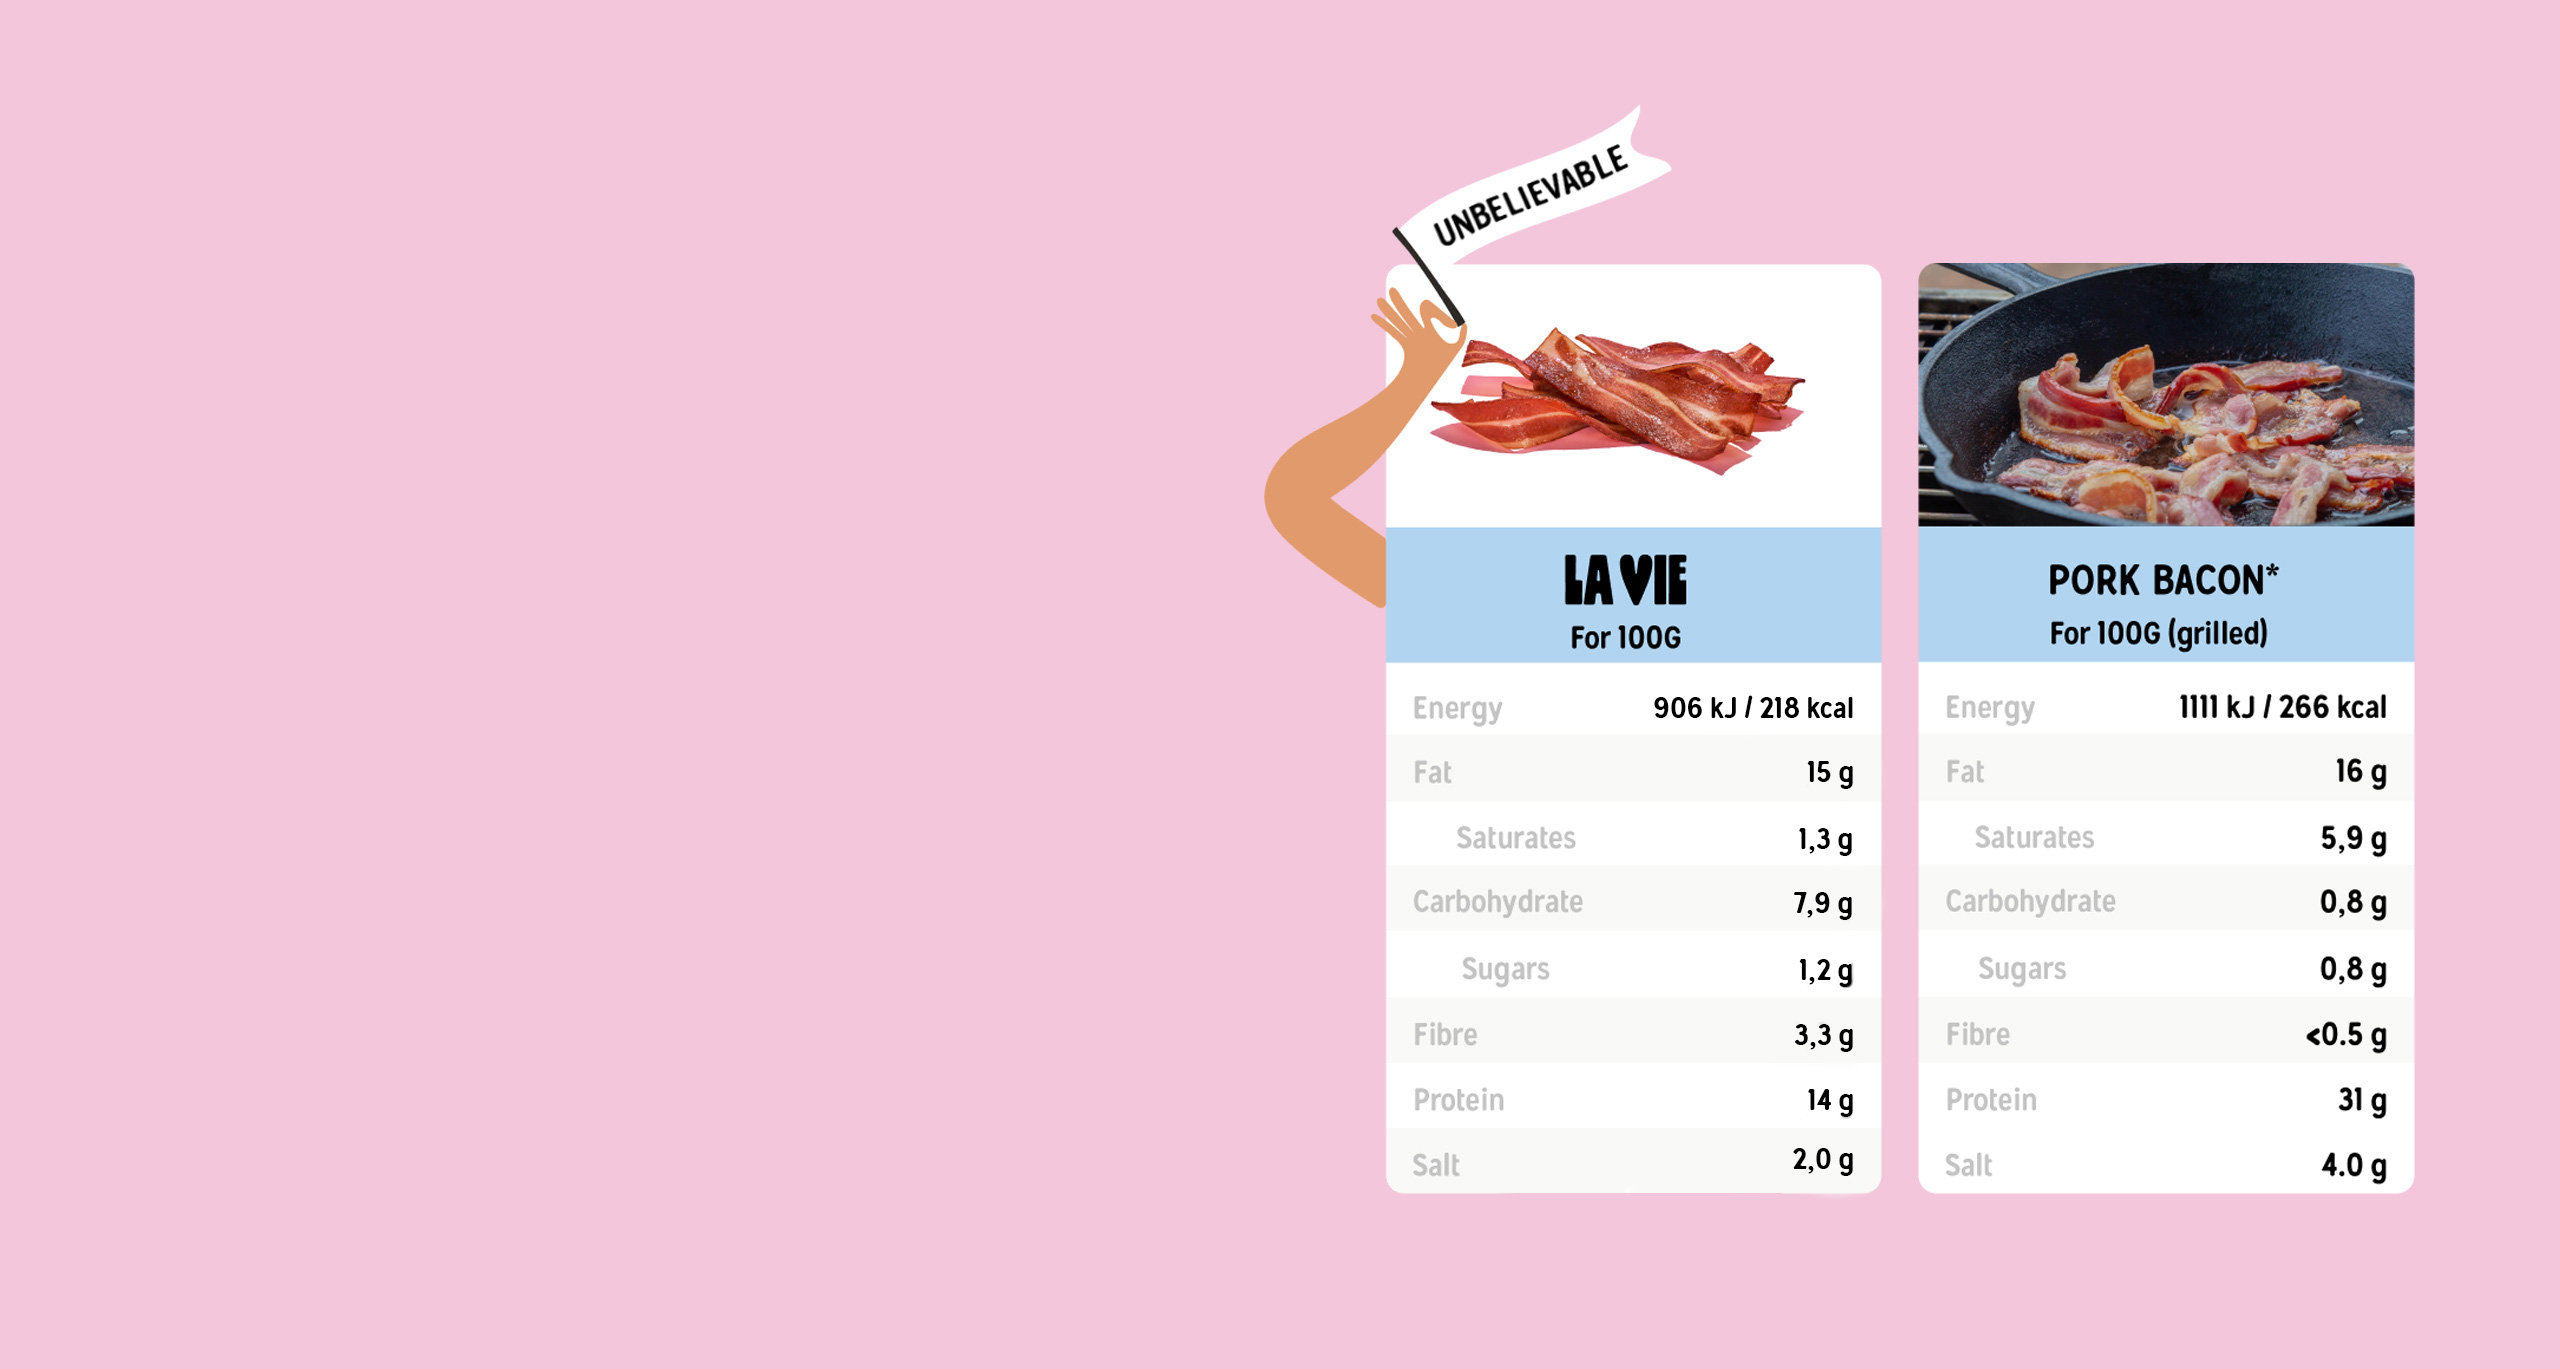 Nutrition information of our vegan bacon and porc bacon